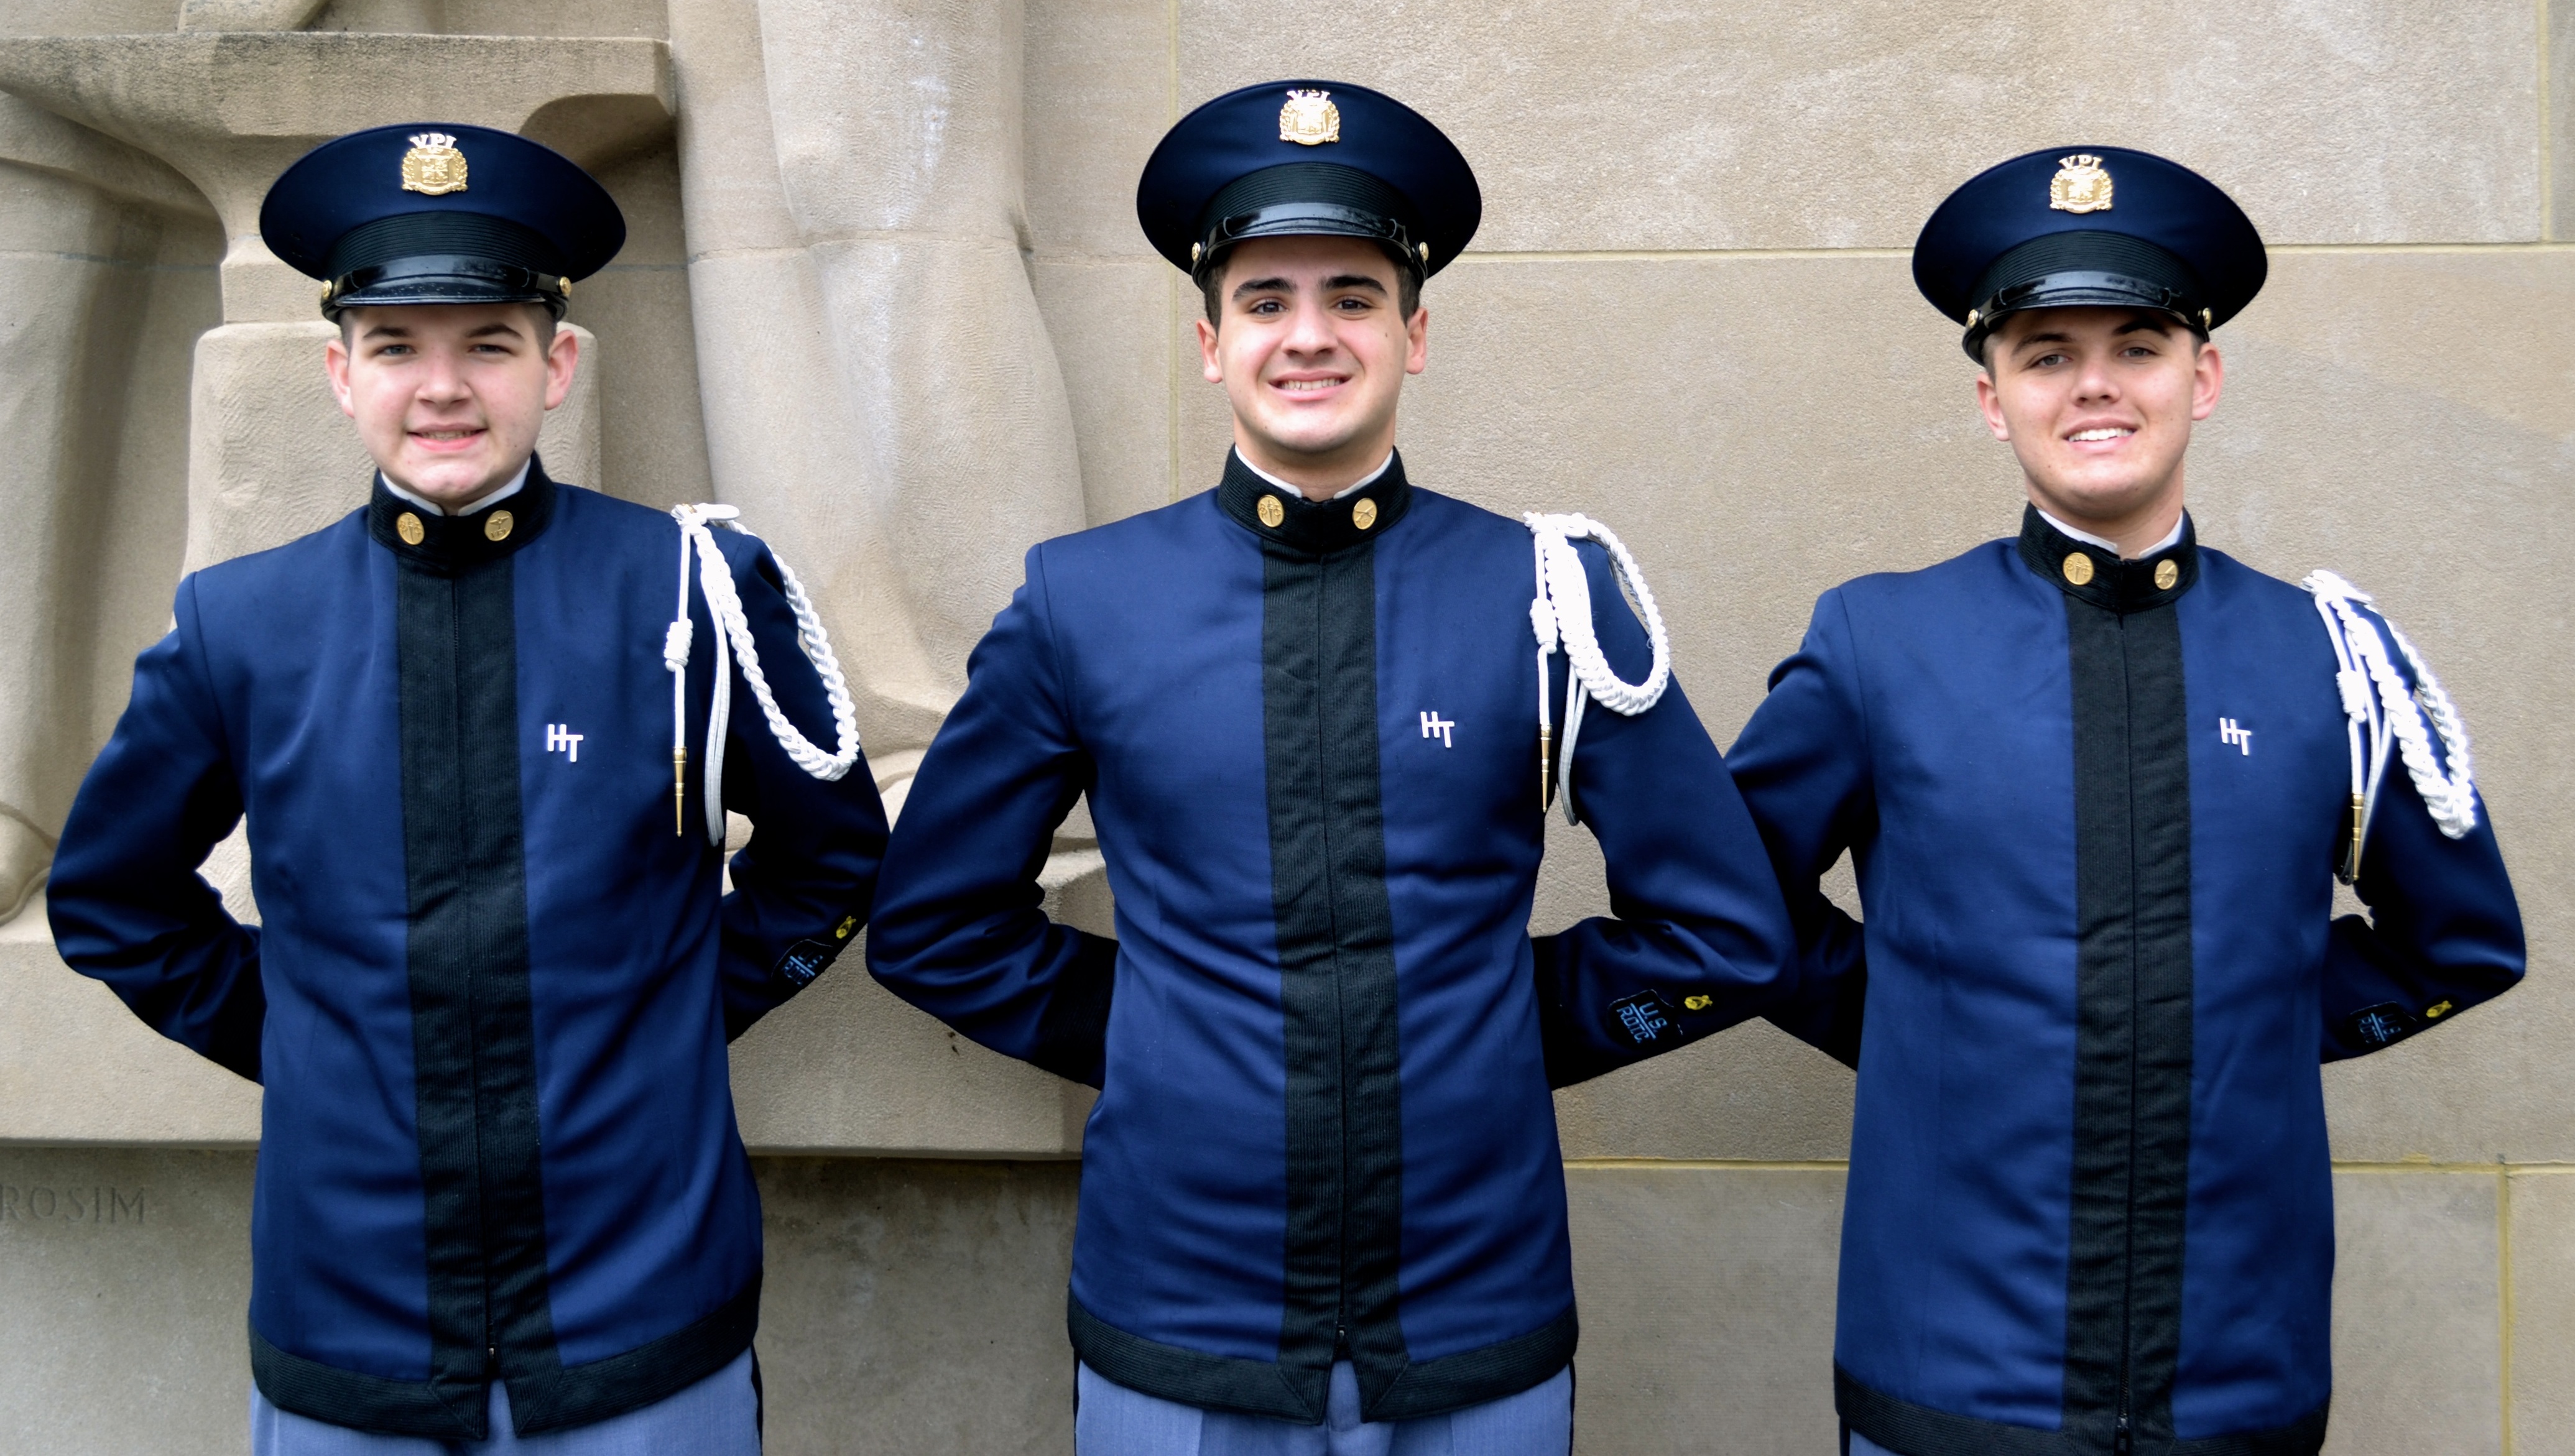 From left to right are Cadet Mason Sorrell, Cadet Fabio Brocco, and Cadet Zachery Luce in front of the Pylons.